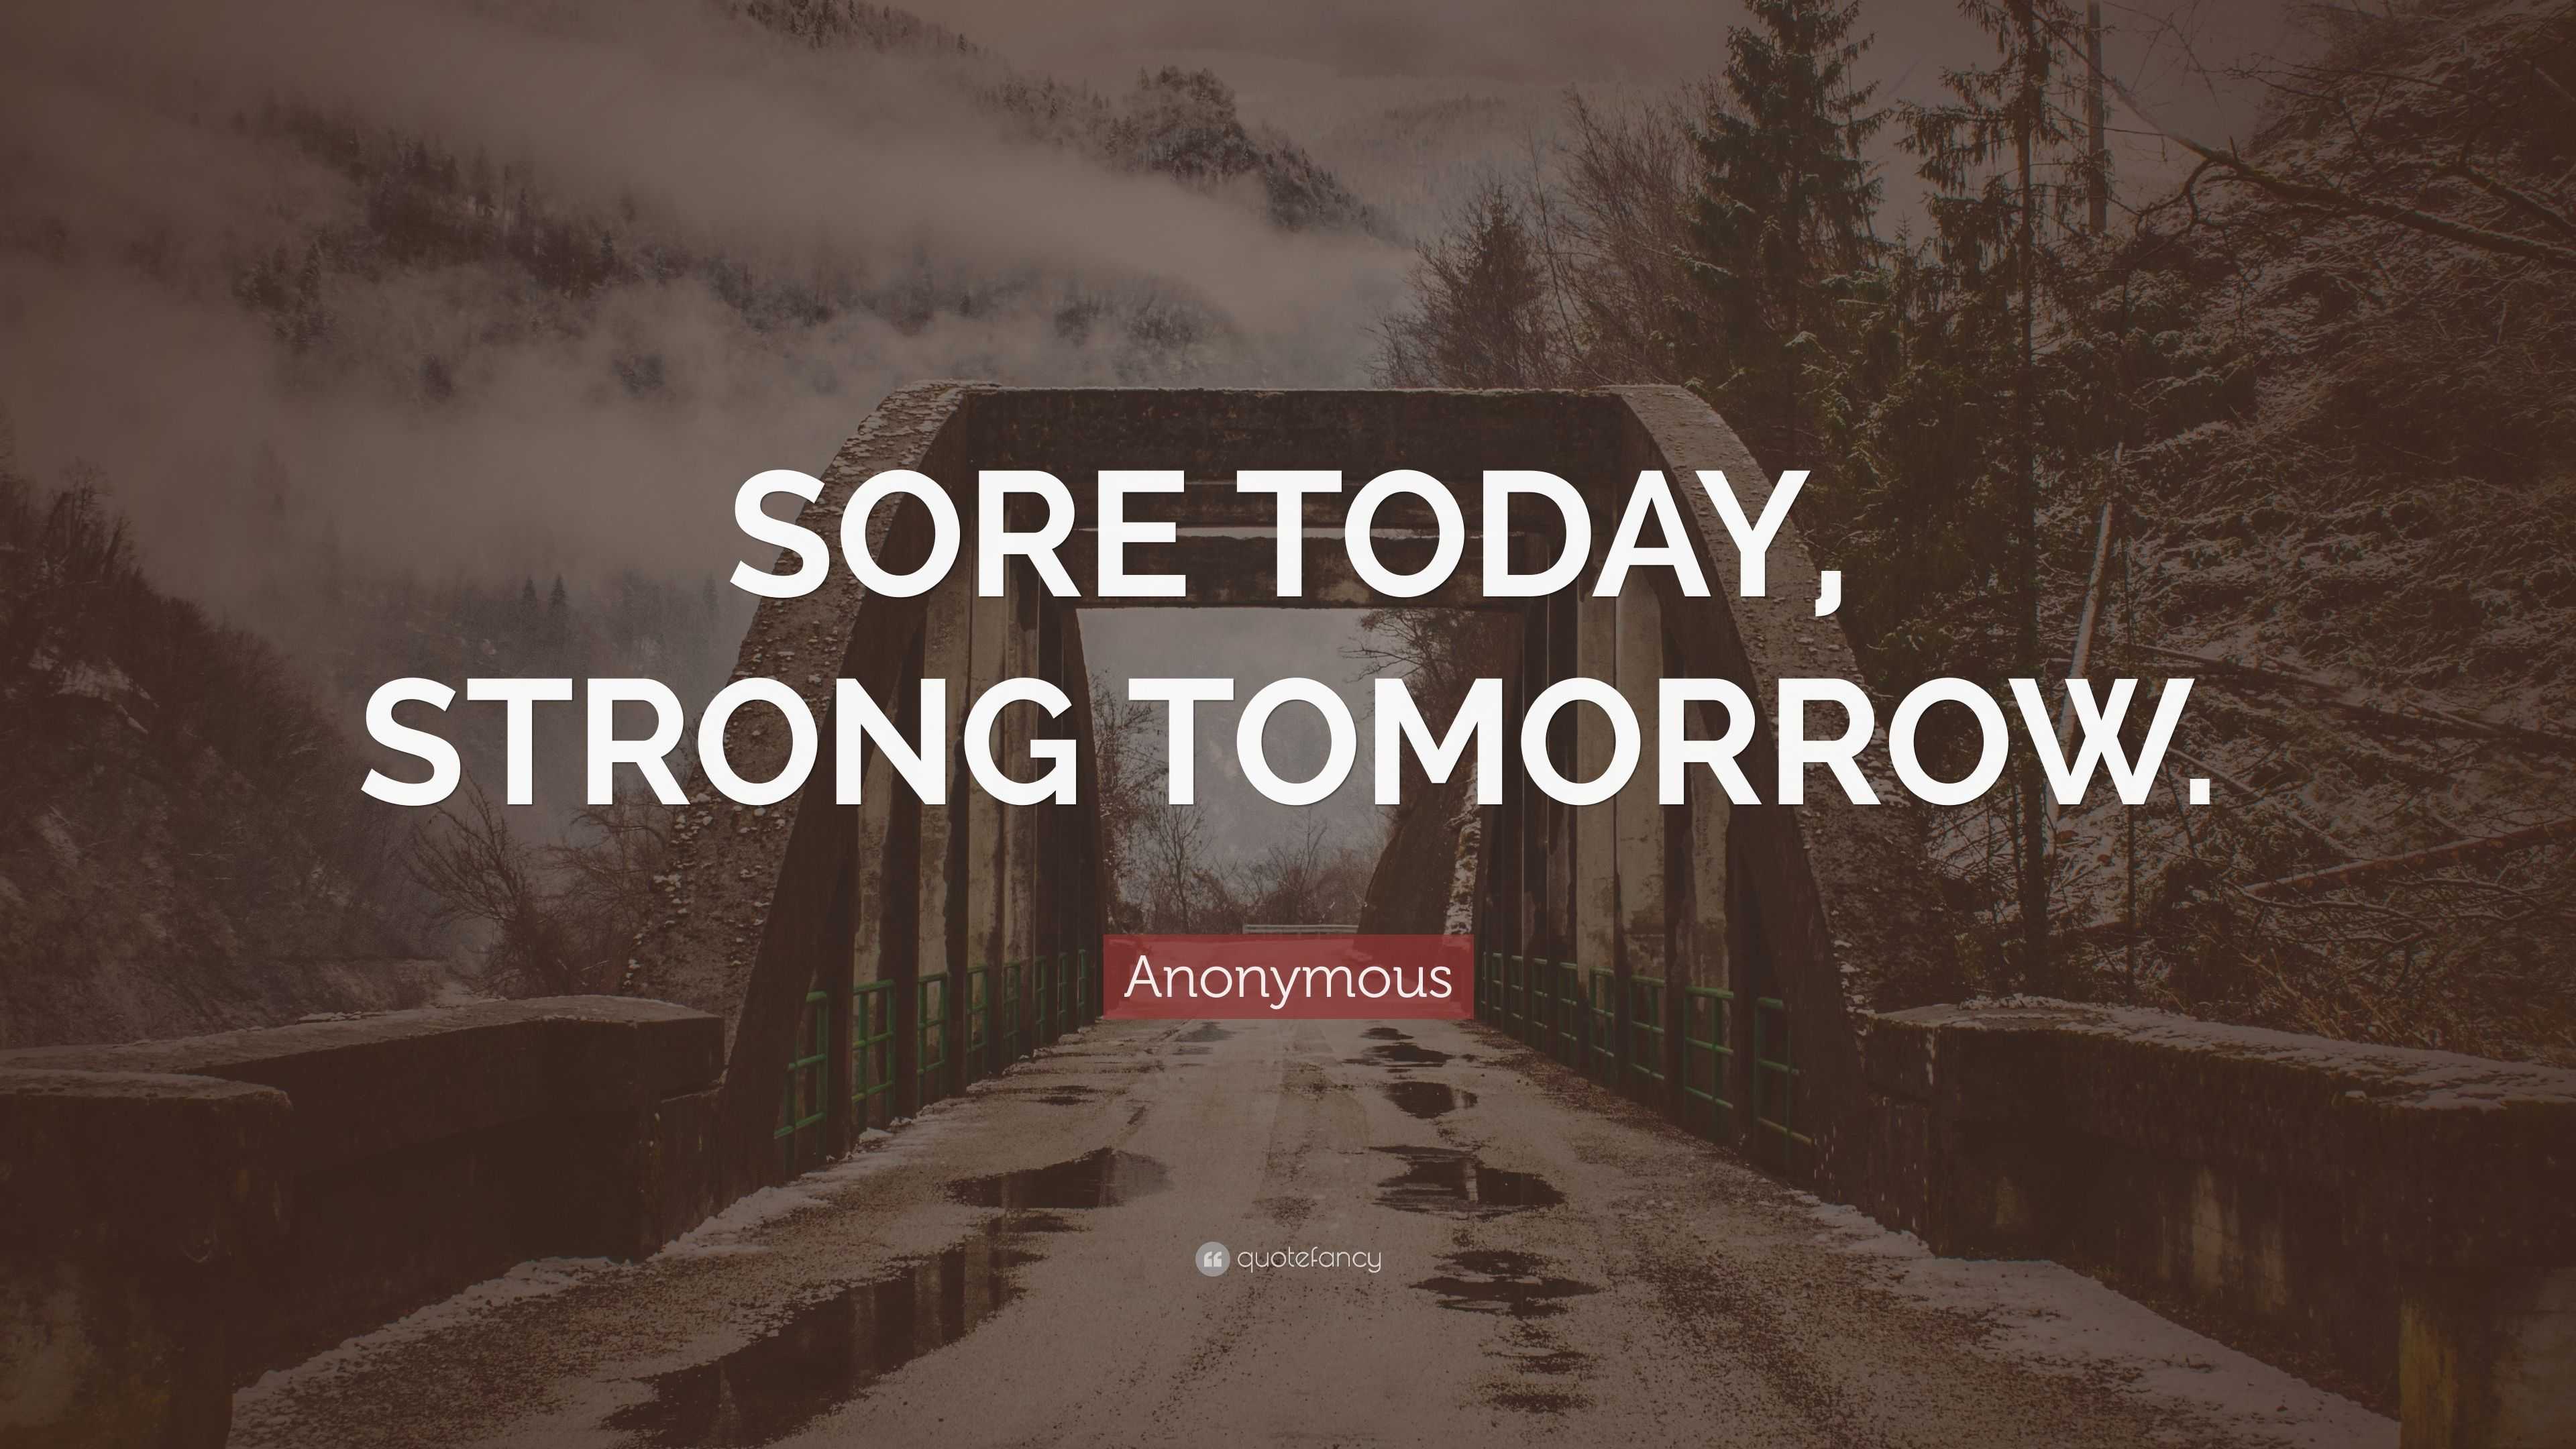 Sore today strong tomorrow by Naxart Studio